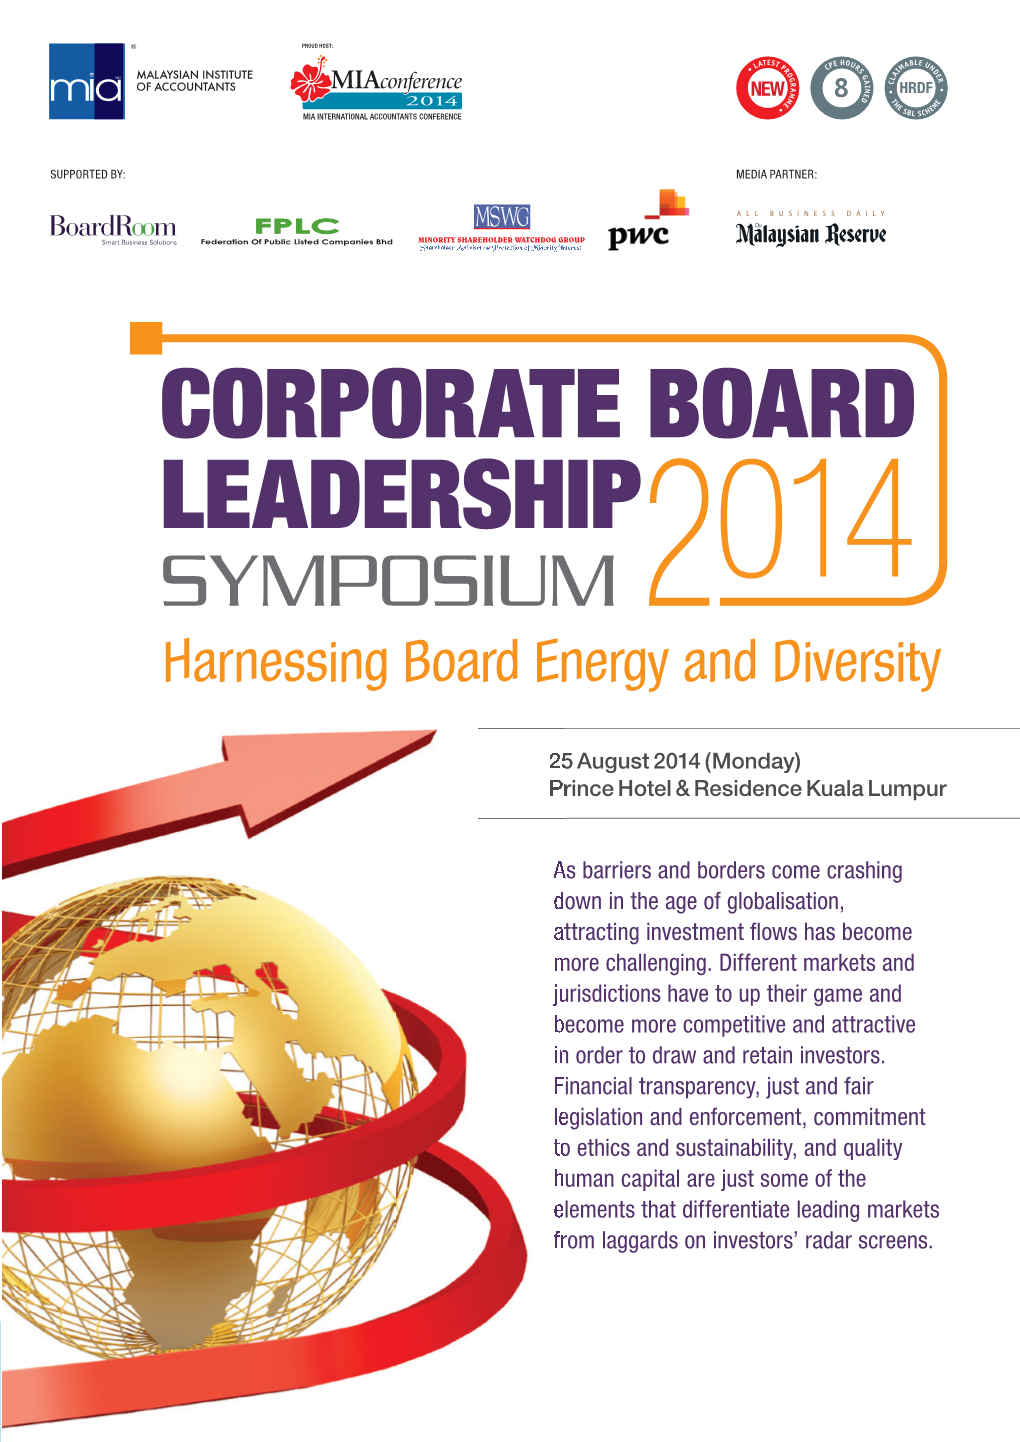 Harnessing Board Energy and Diversity